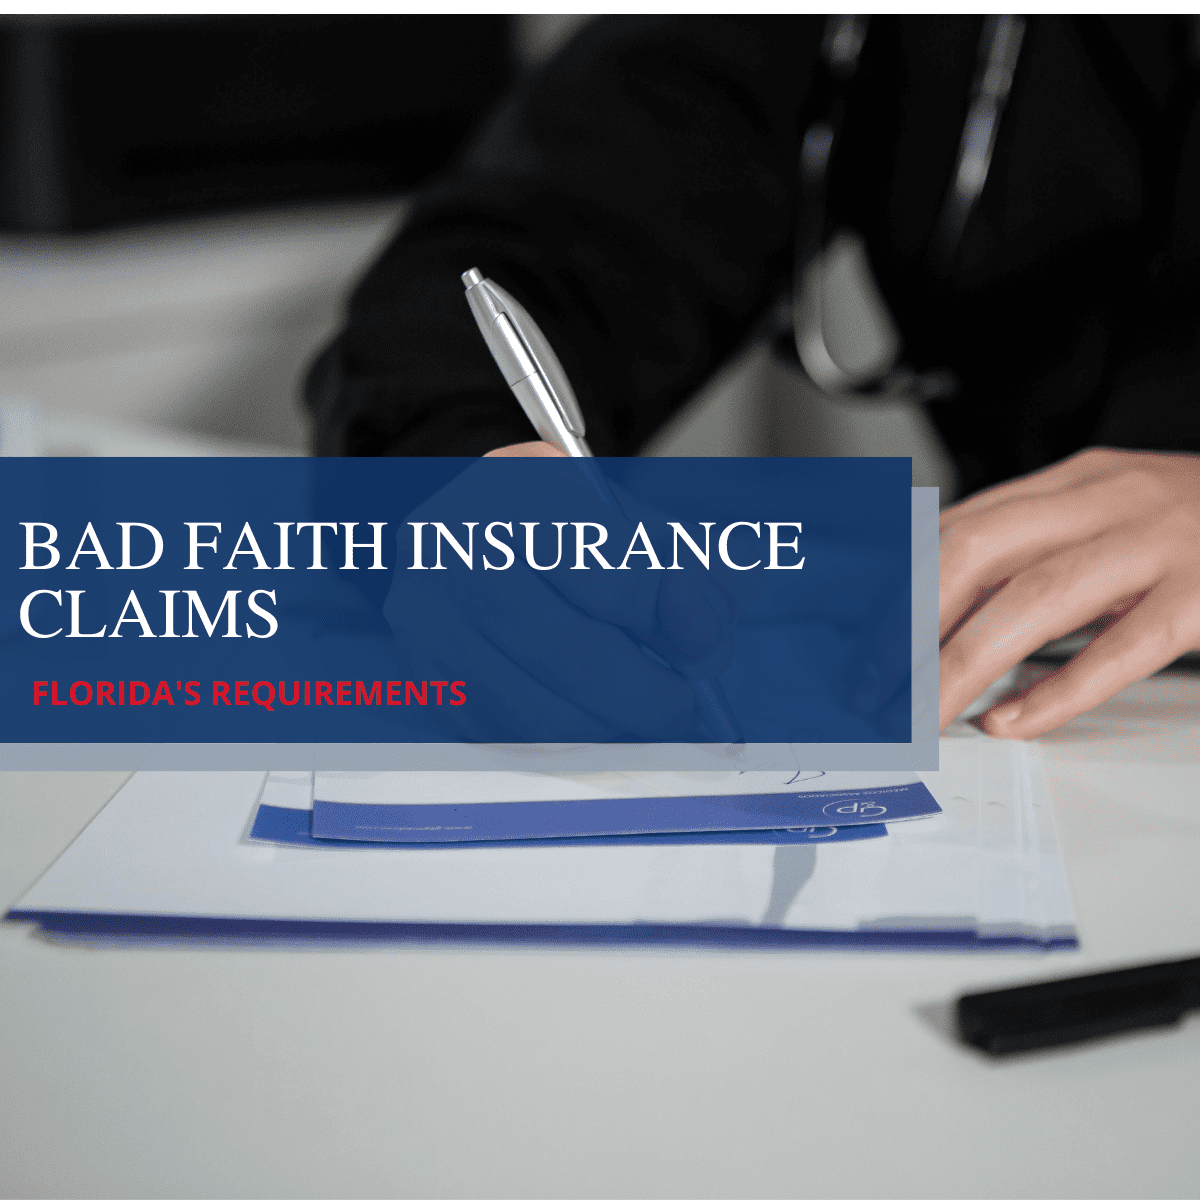 Understanding Florida’s Requirements for Bad Faith Insurance Claims